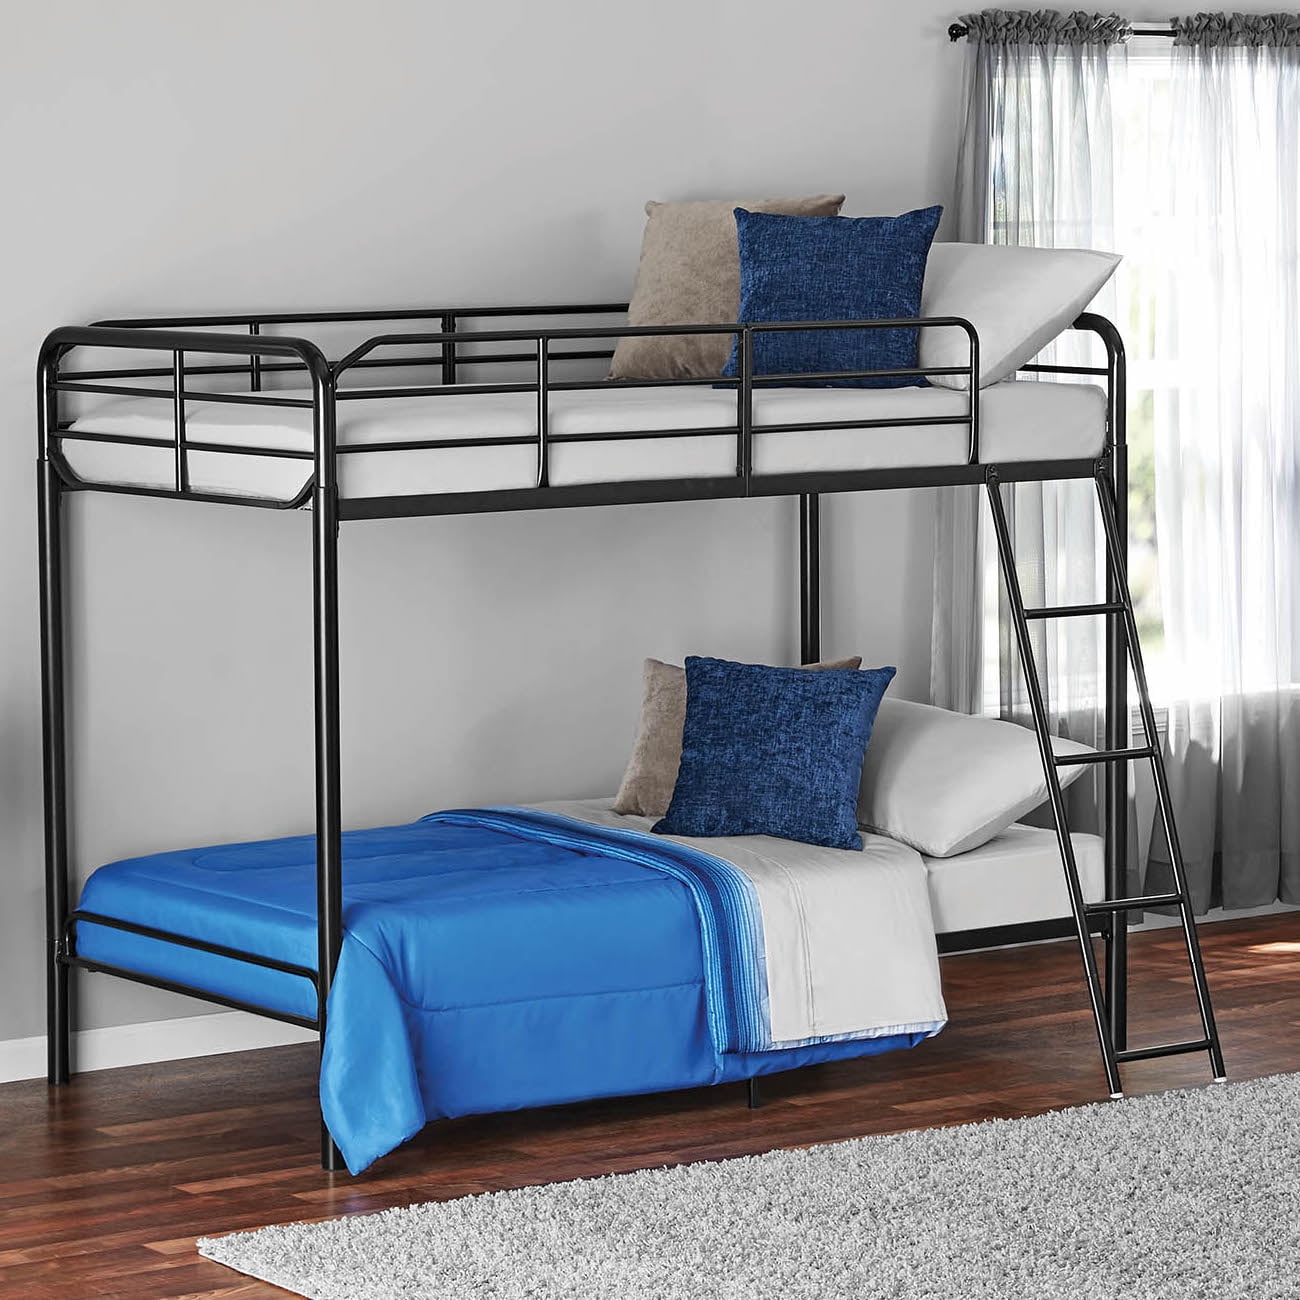 Mainstays Twin Over Metal Bunk Bed, Mainstays Bunk Bed Instructions Pdf